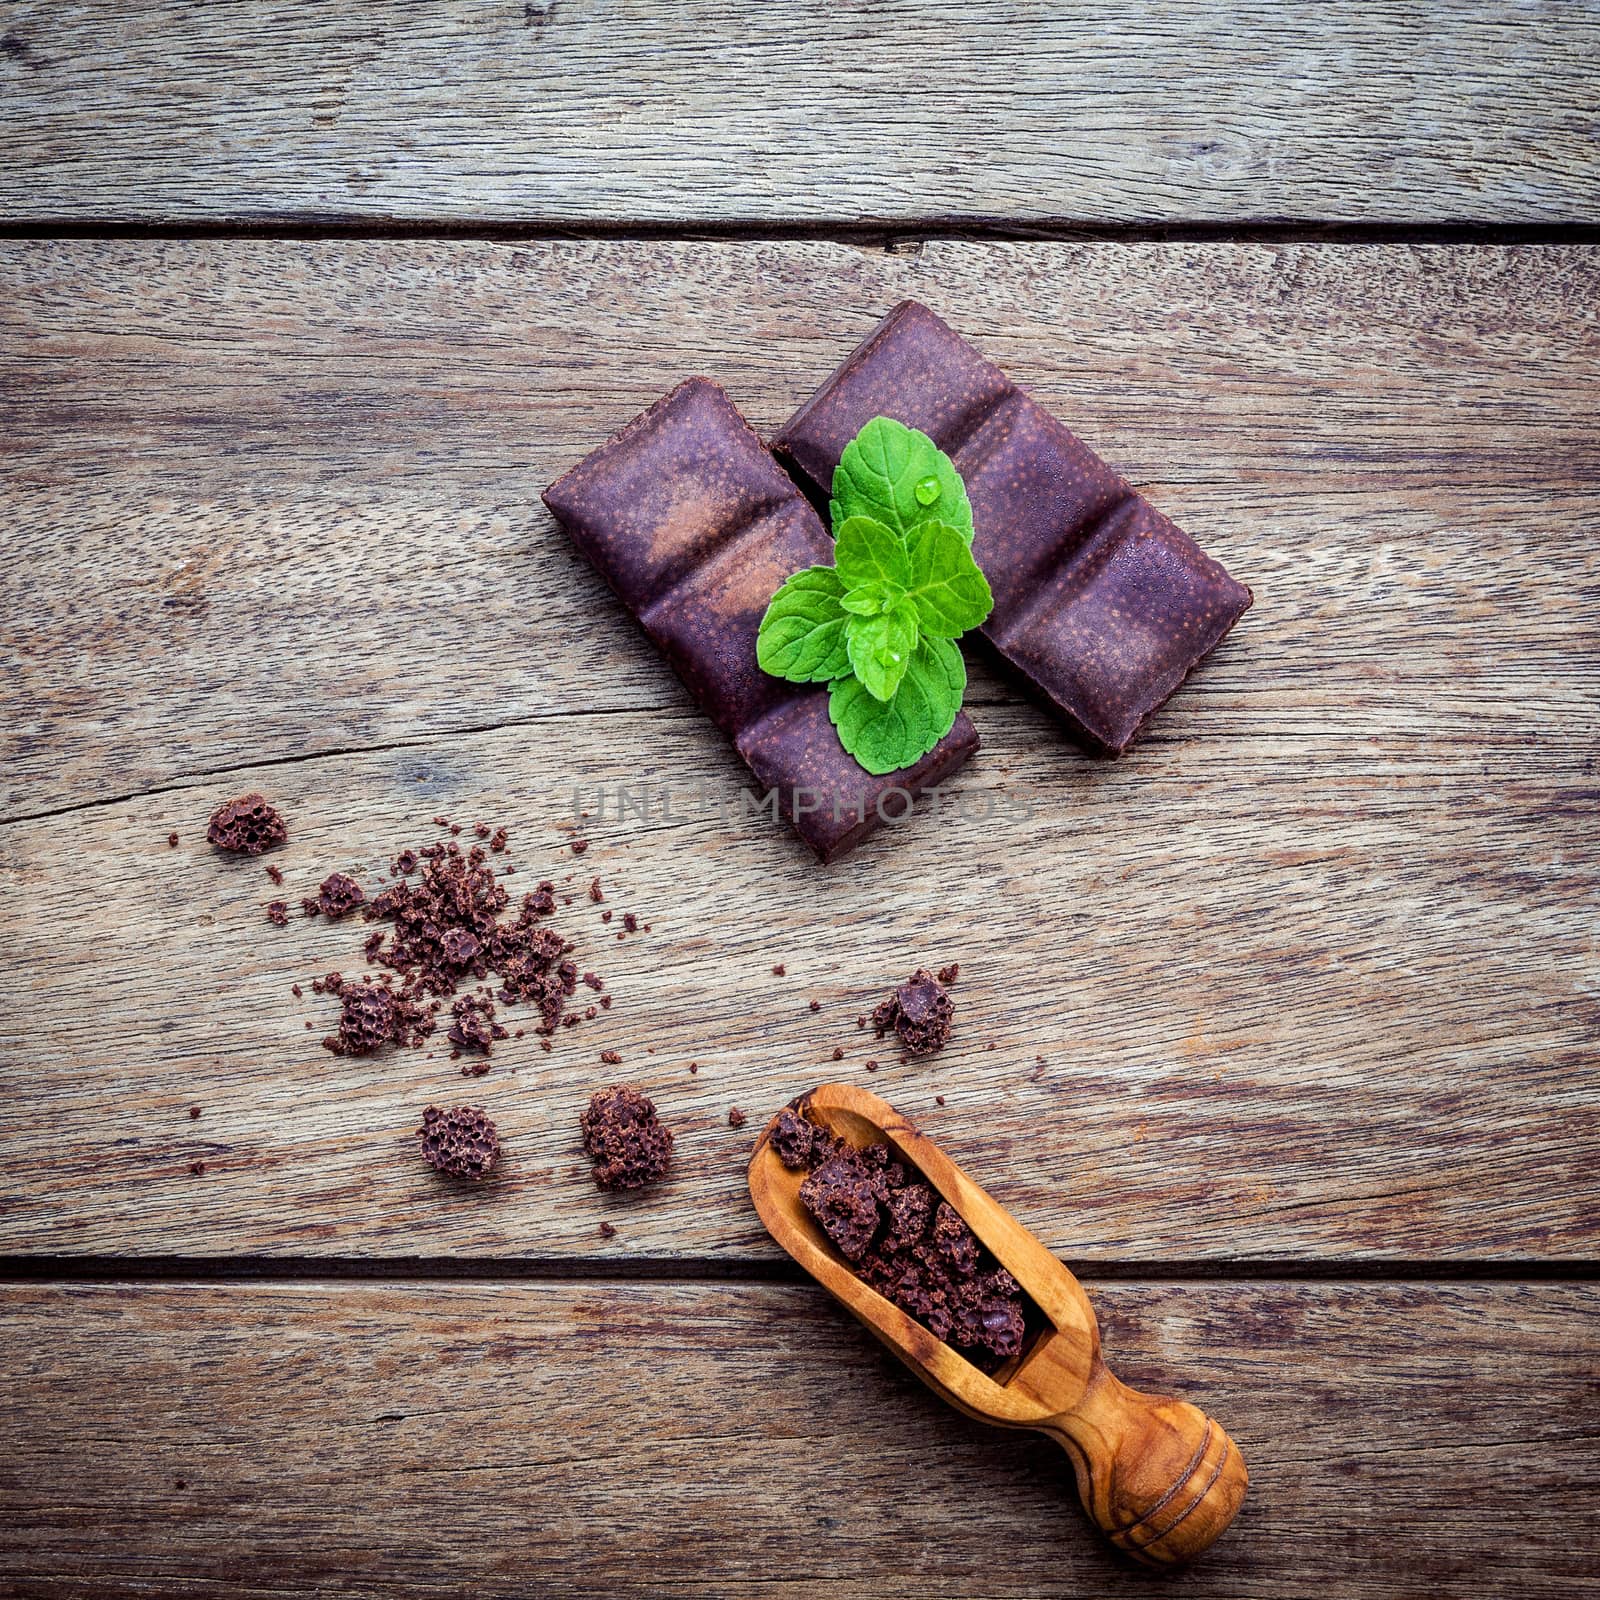 Chocolate background and dessert menu. Ingredients for bakery chocolate bar with mint ,chocolate powder in wooden spoon setup on dark shabby wooden background.